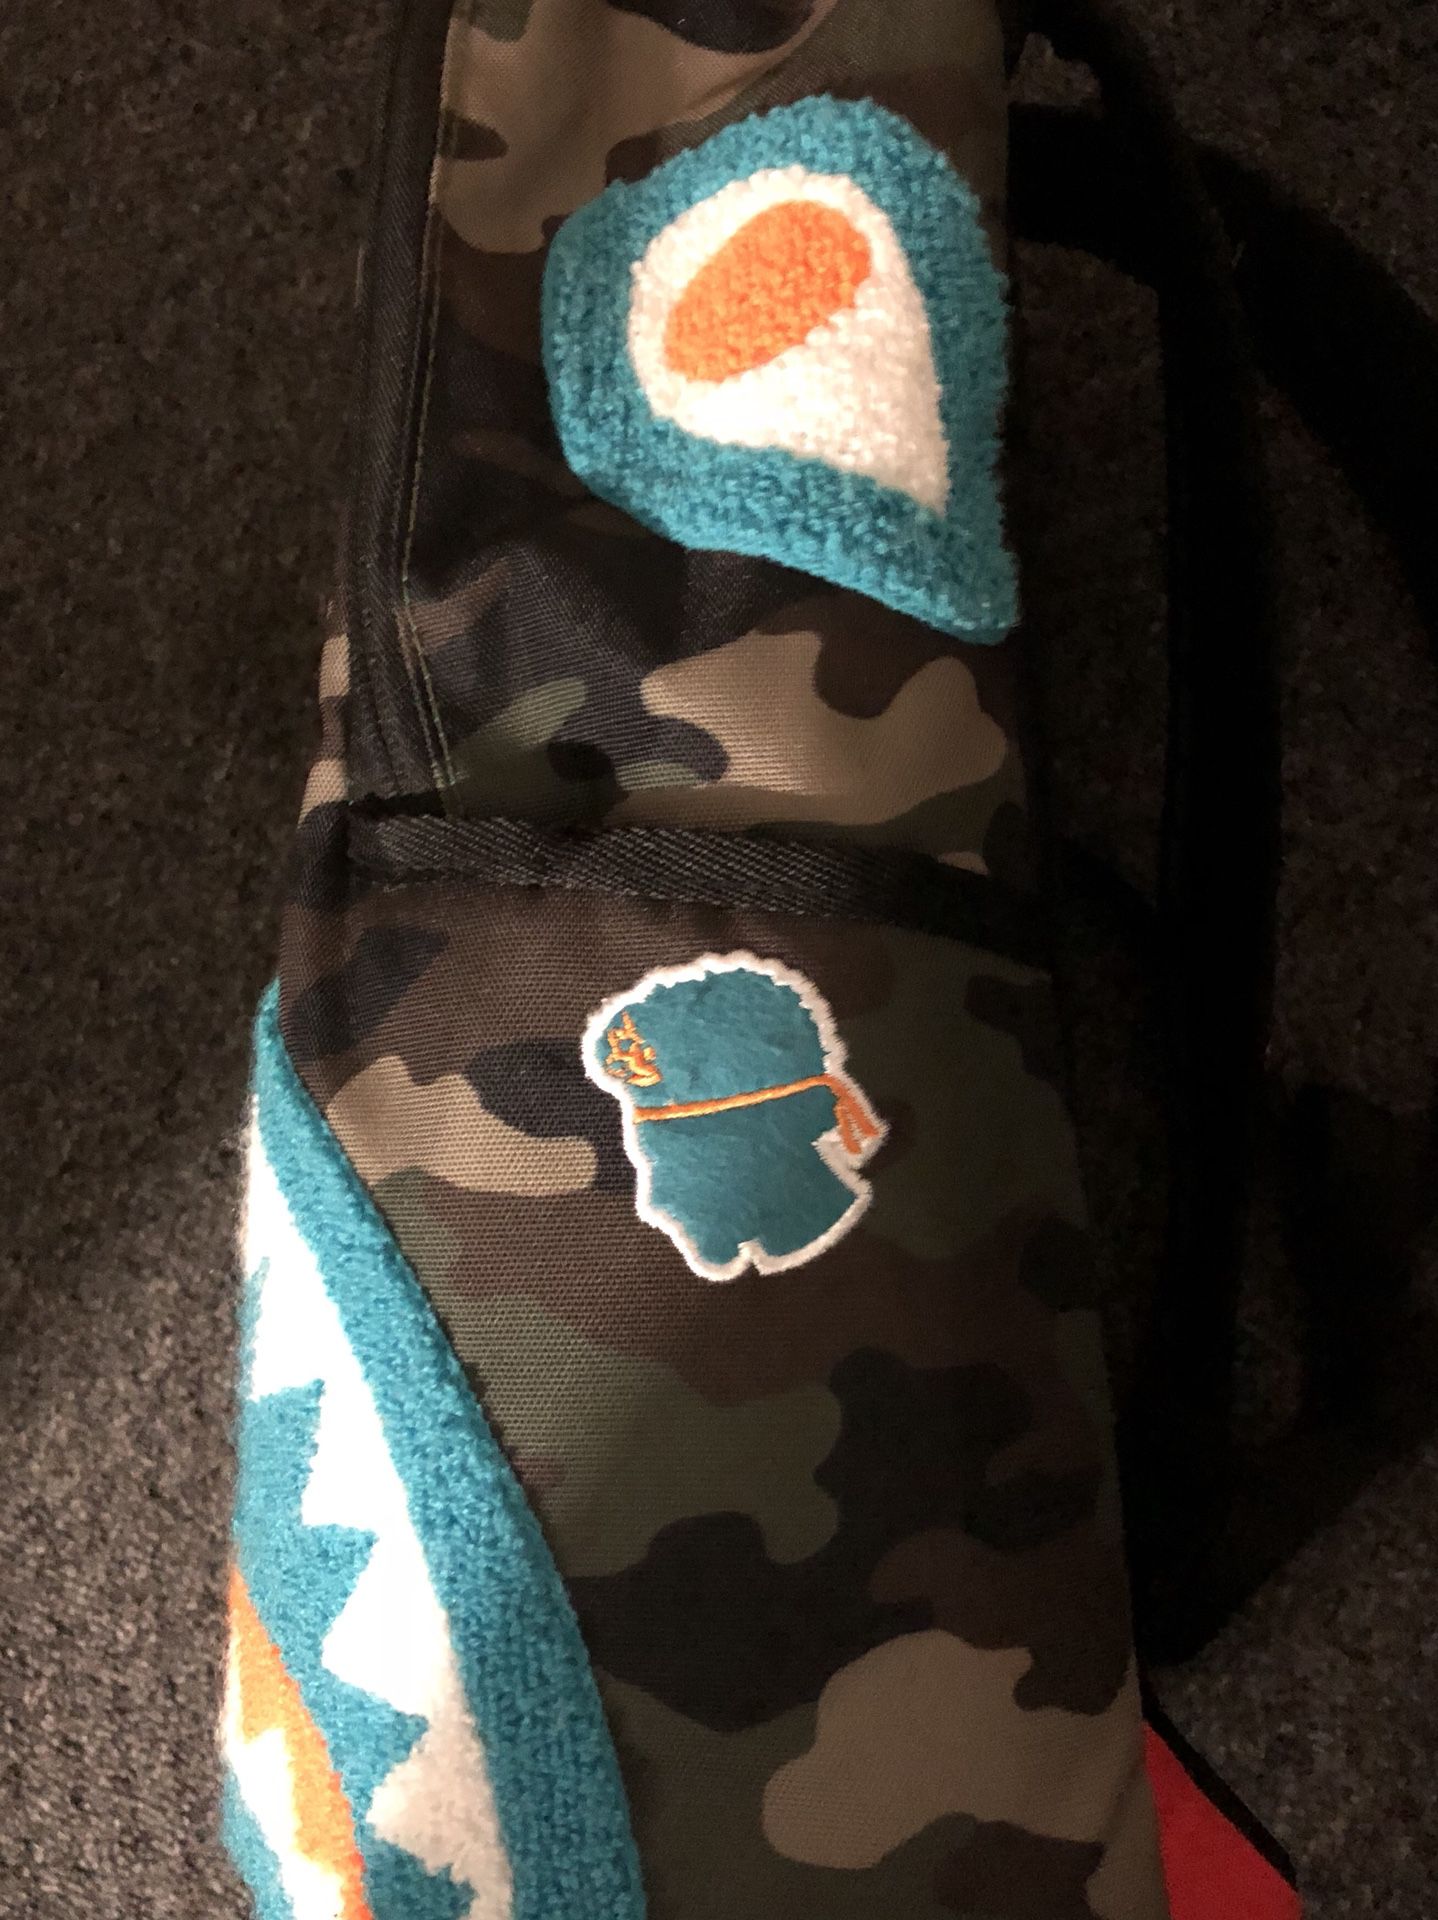 Sprayground x Jarvis Landry Camo Limited Edition Backpack for Sale in  Chandler, AZ - OfferUp